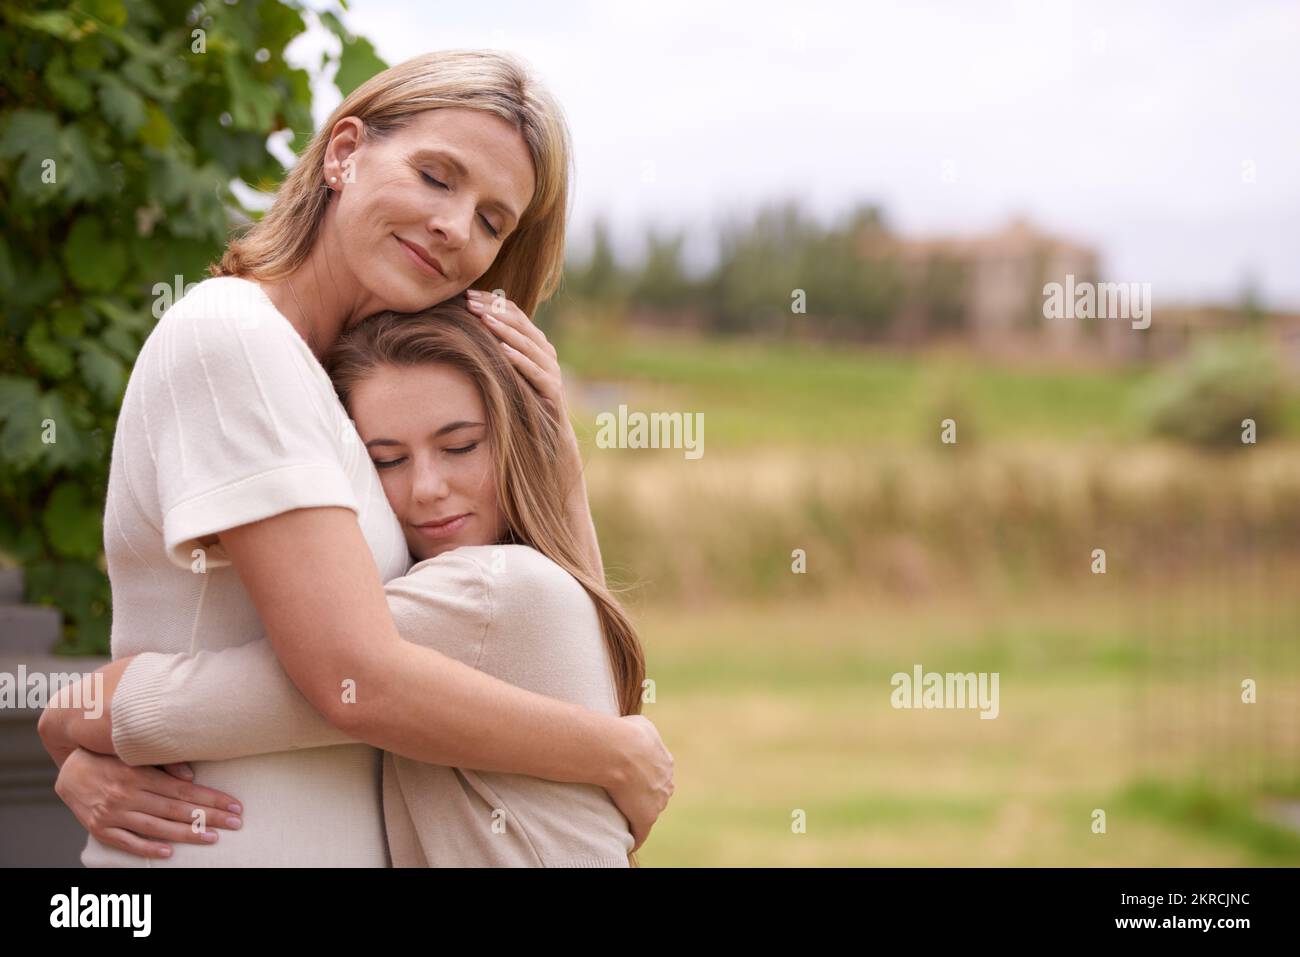 Their love for each other is so tangible. A mother embracing her daughter in an outdoor setting. Stock Photo